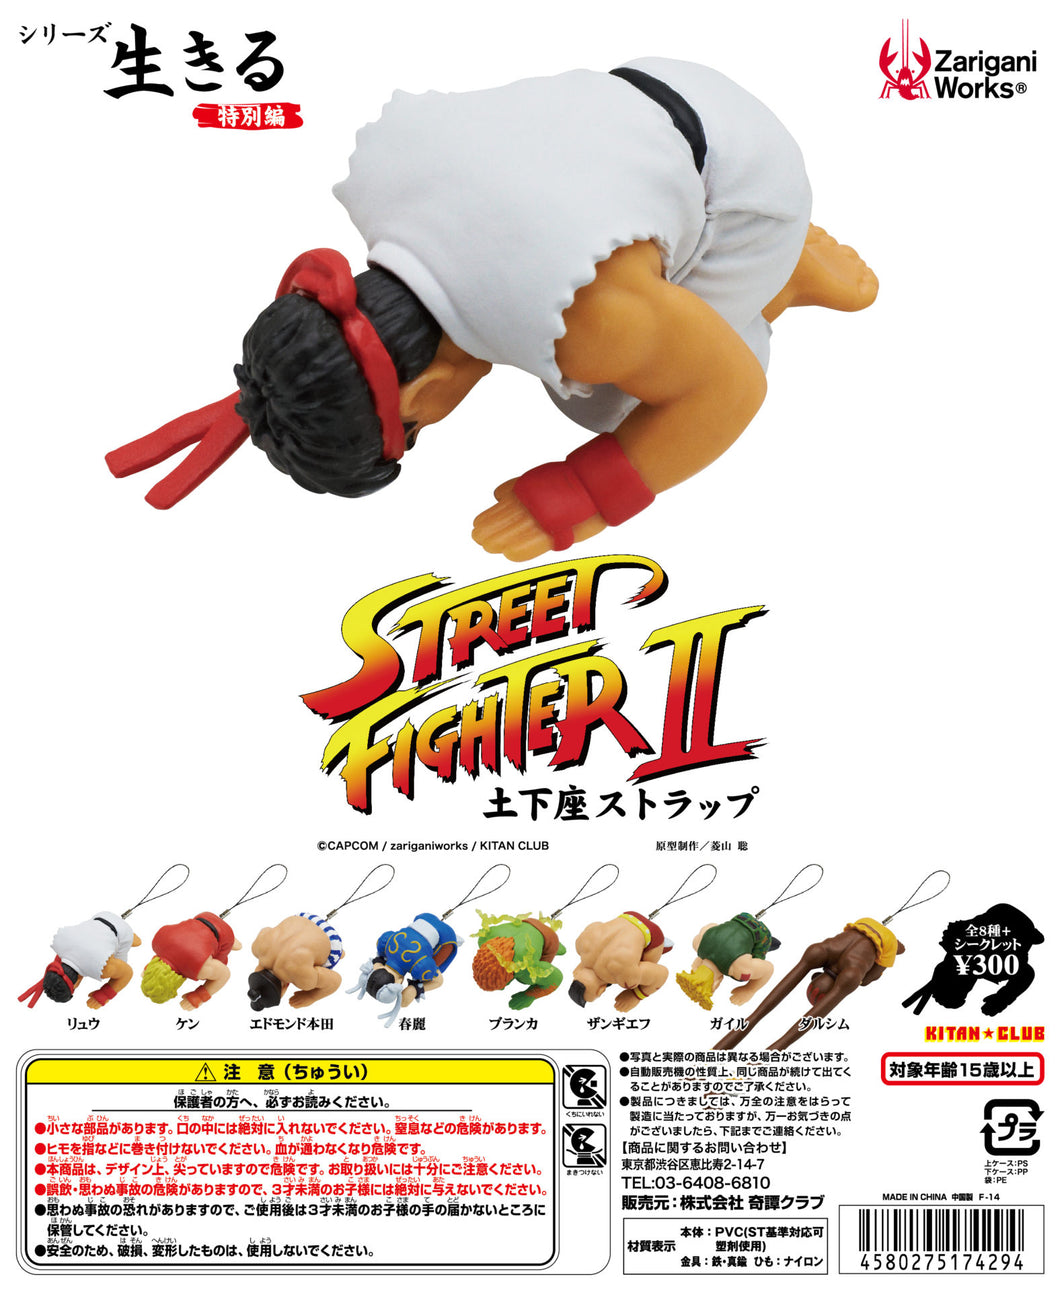 Series Living -Special Edition- Street Fighter II Dogeza Strap - Set of 8 Figures